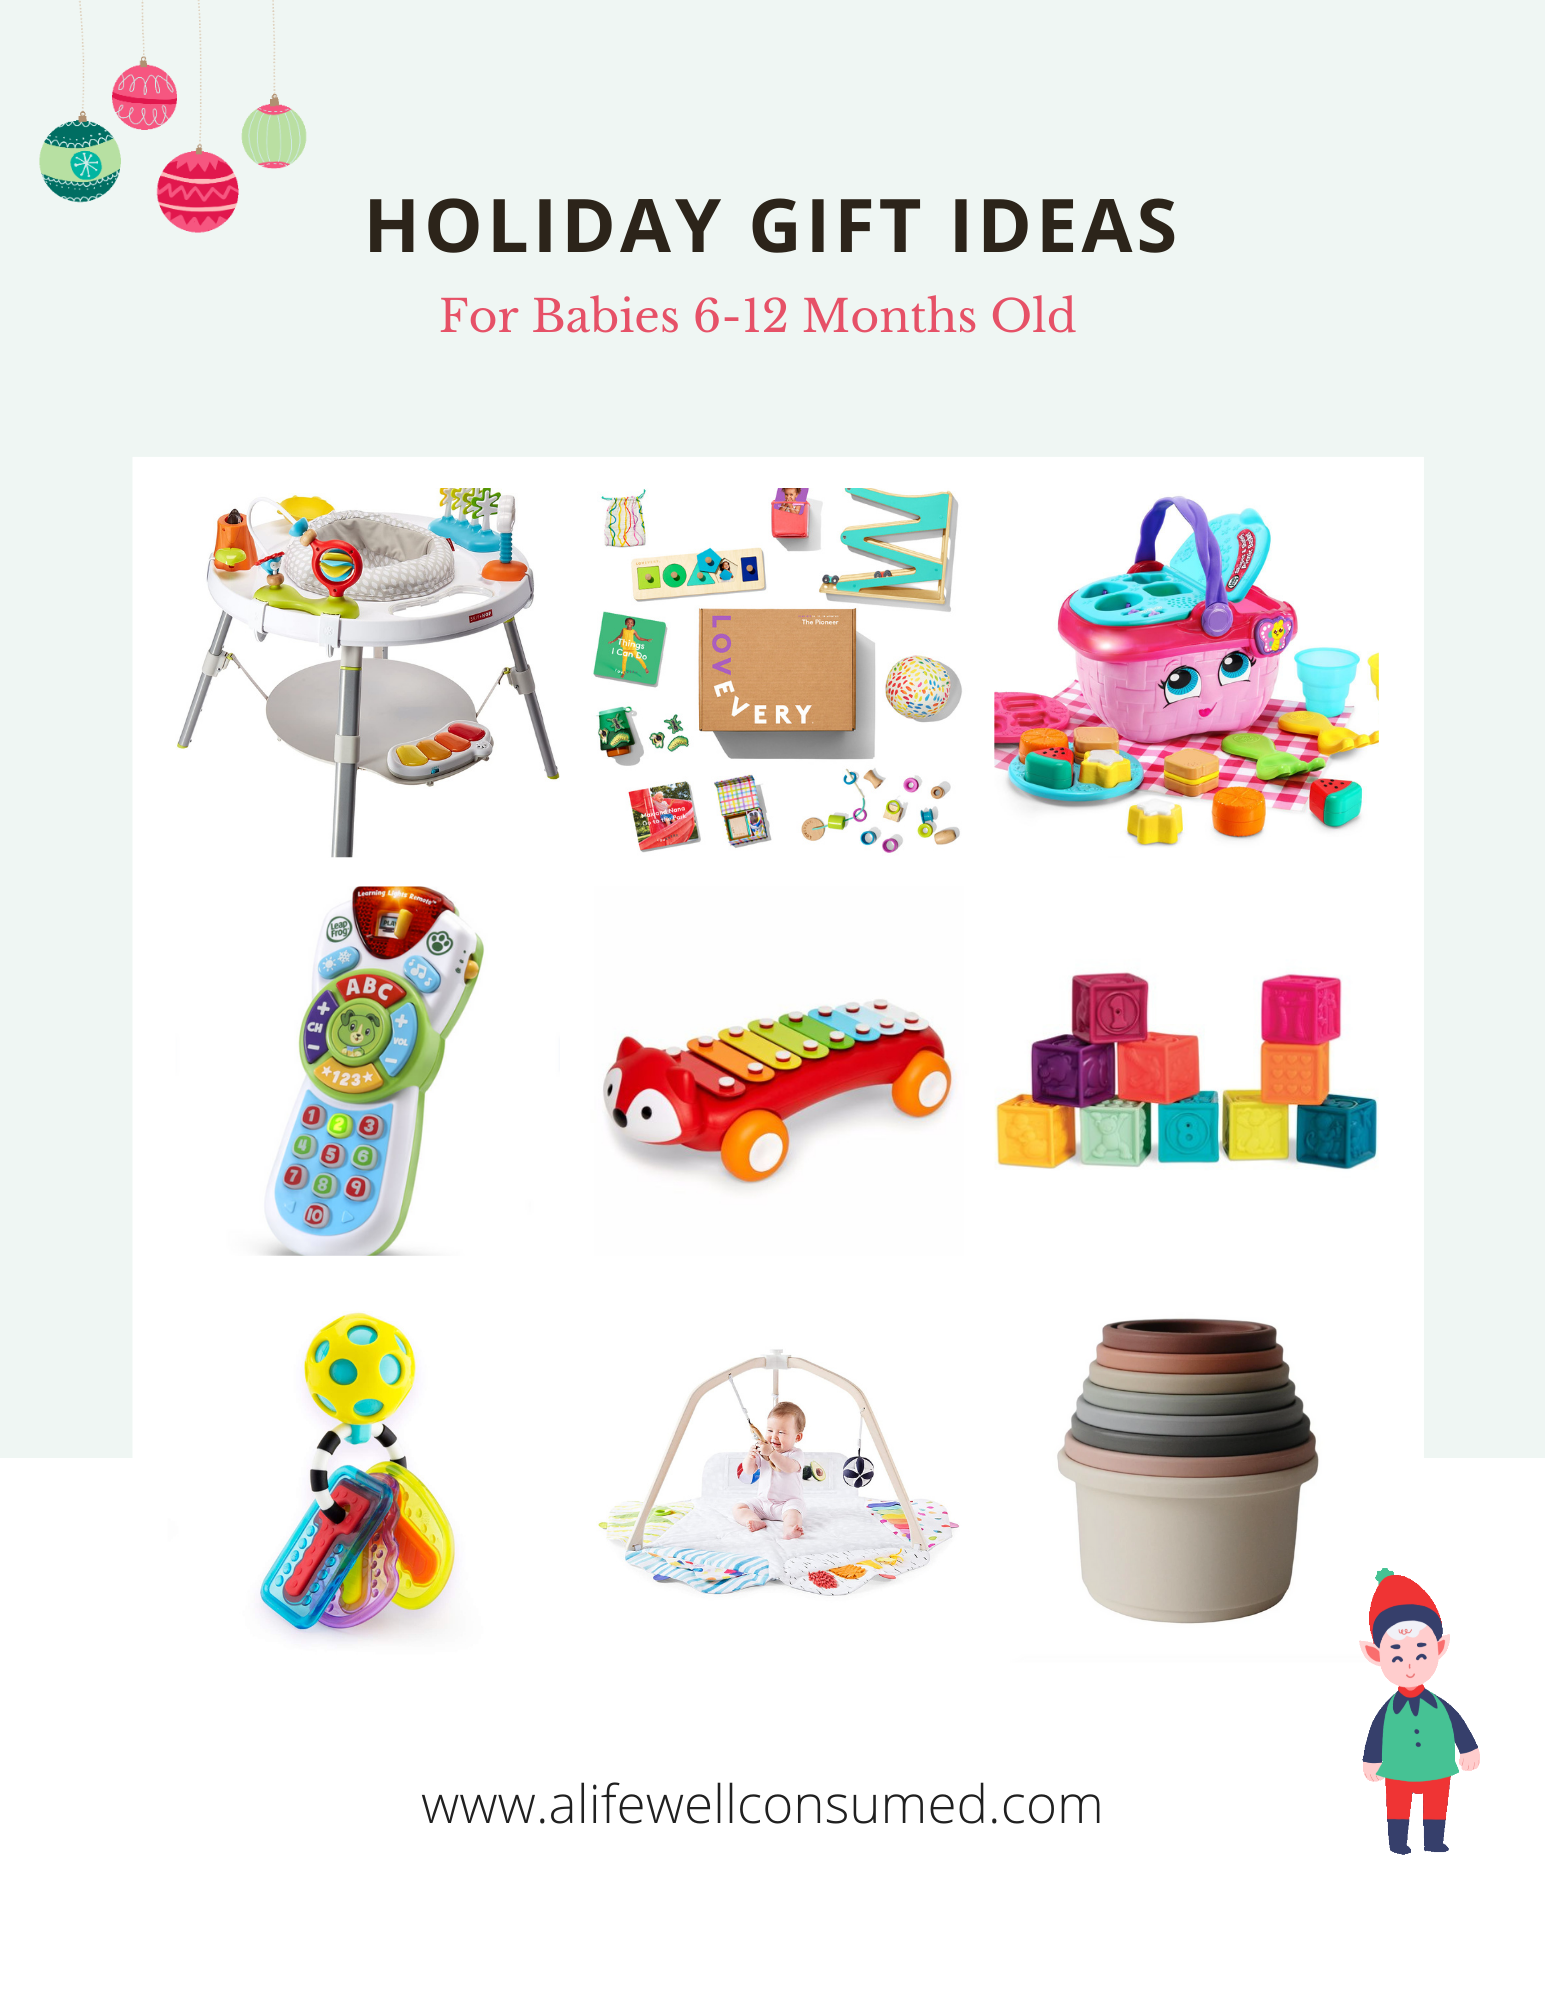 Gift Ideas for Babies